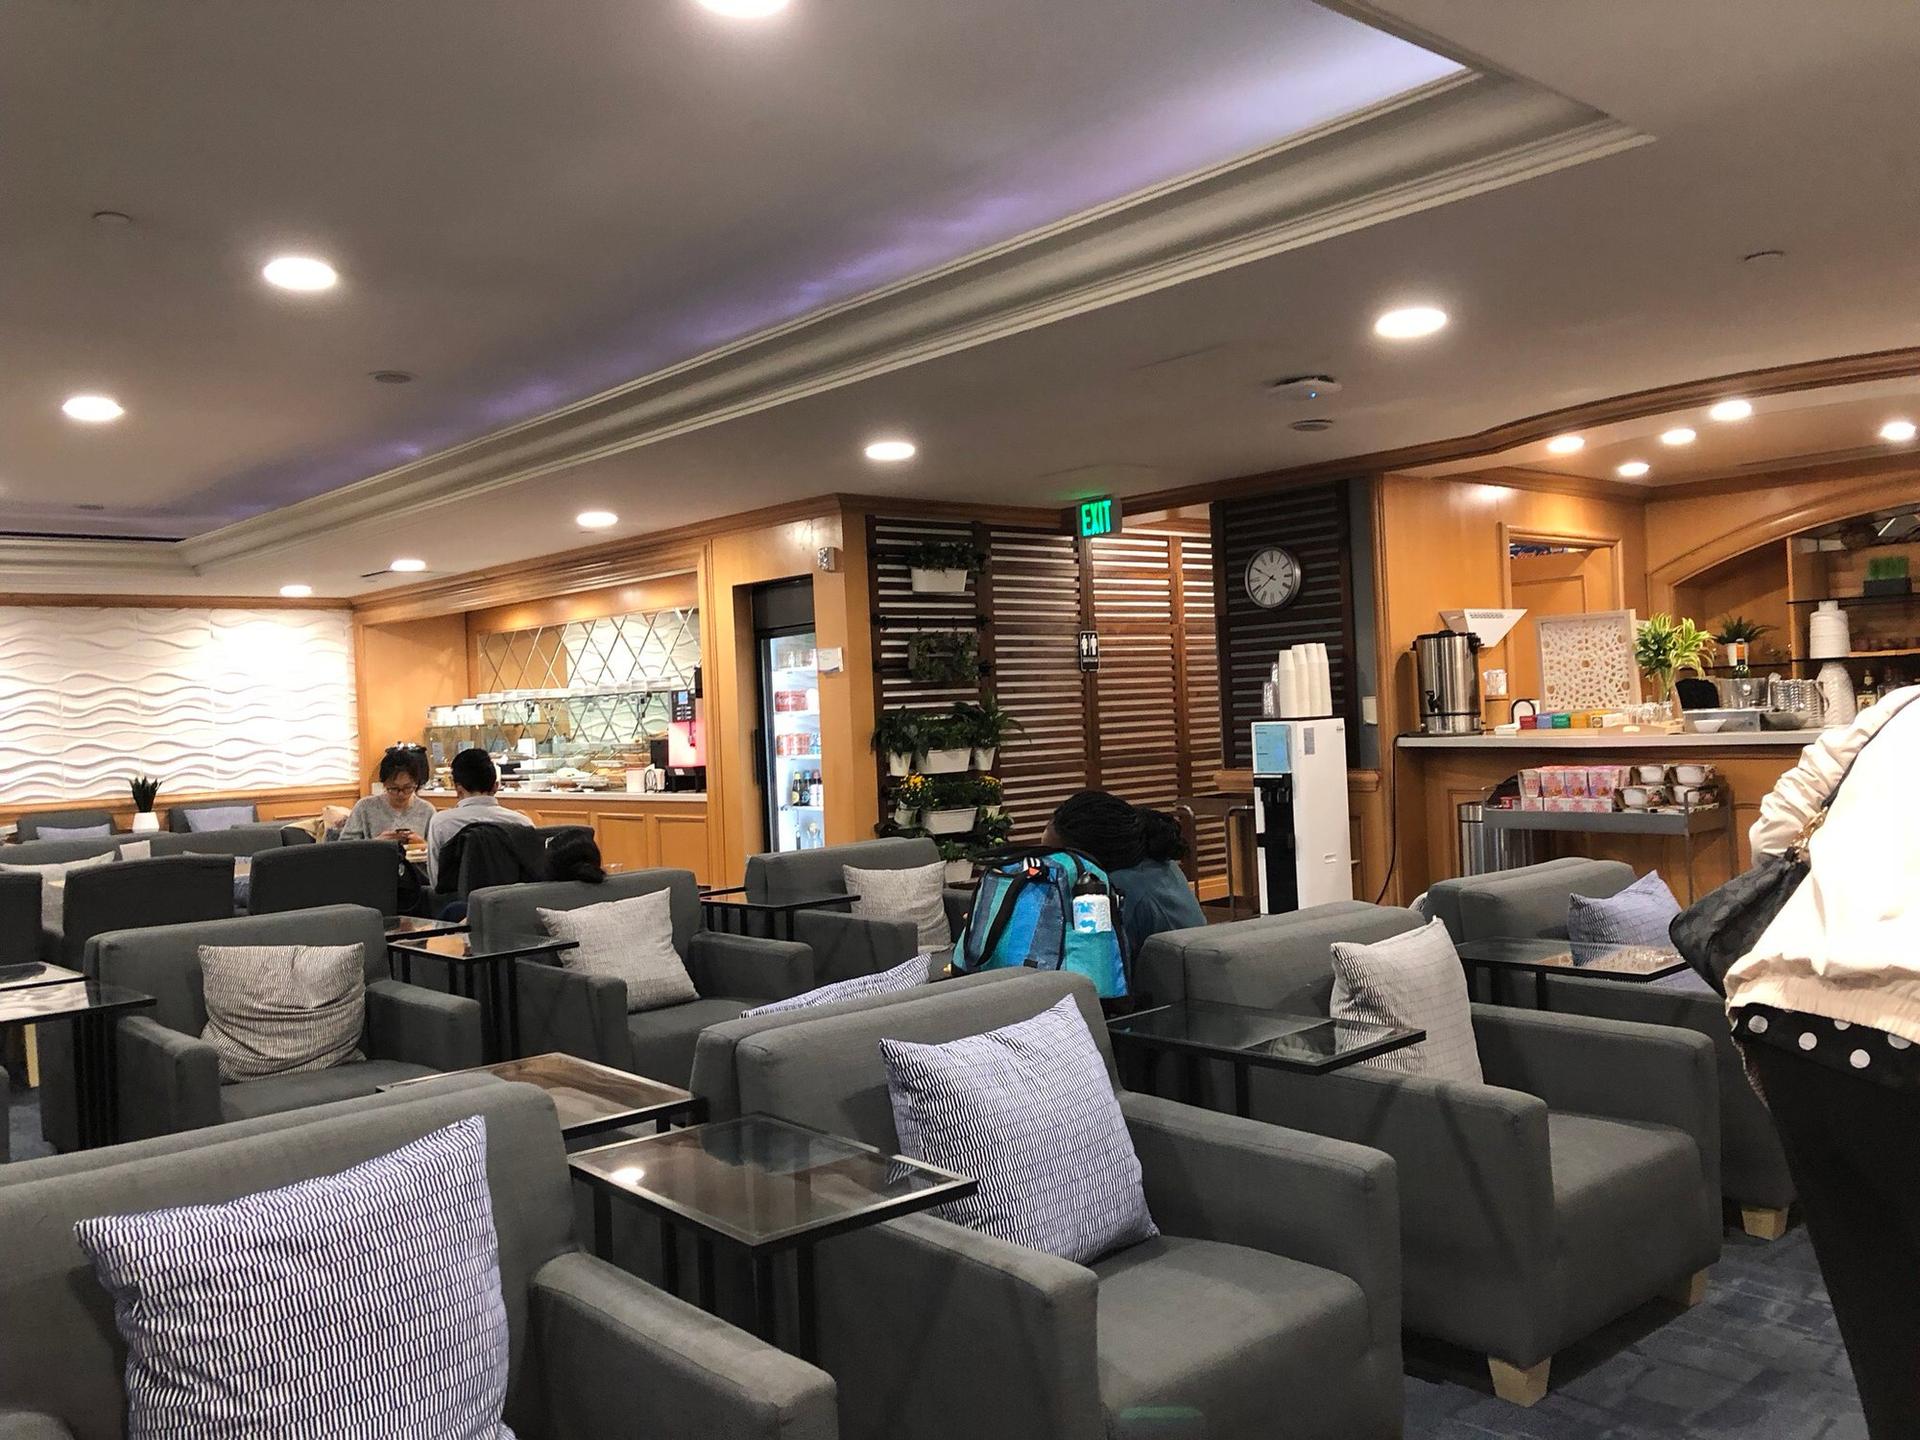 China Airlines Dynasty Lounge image 15 of 34